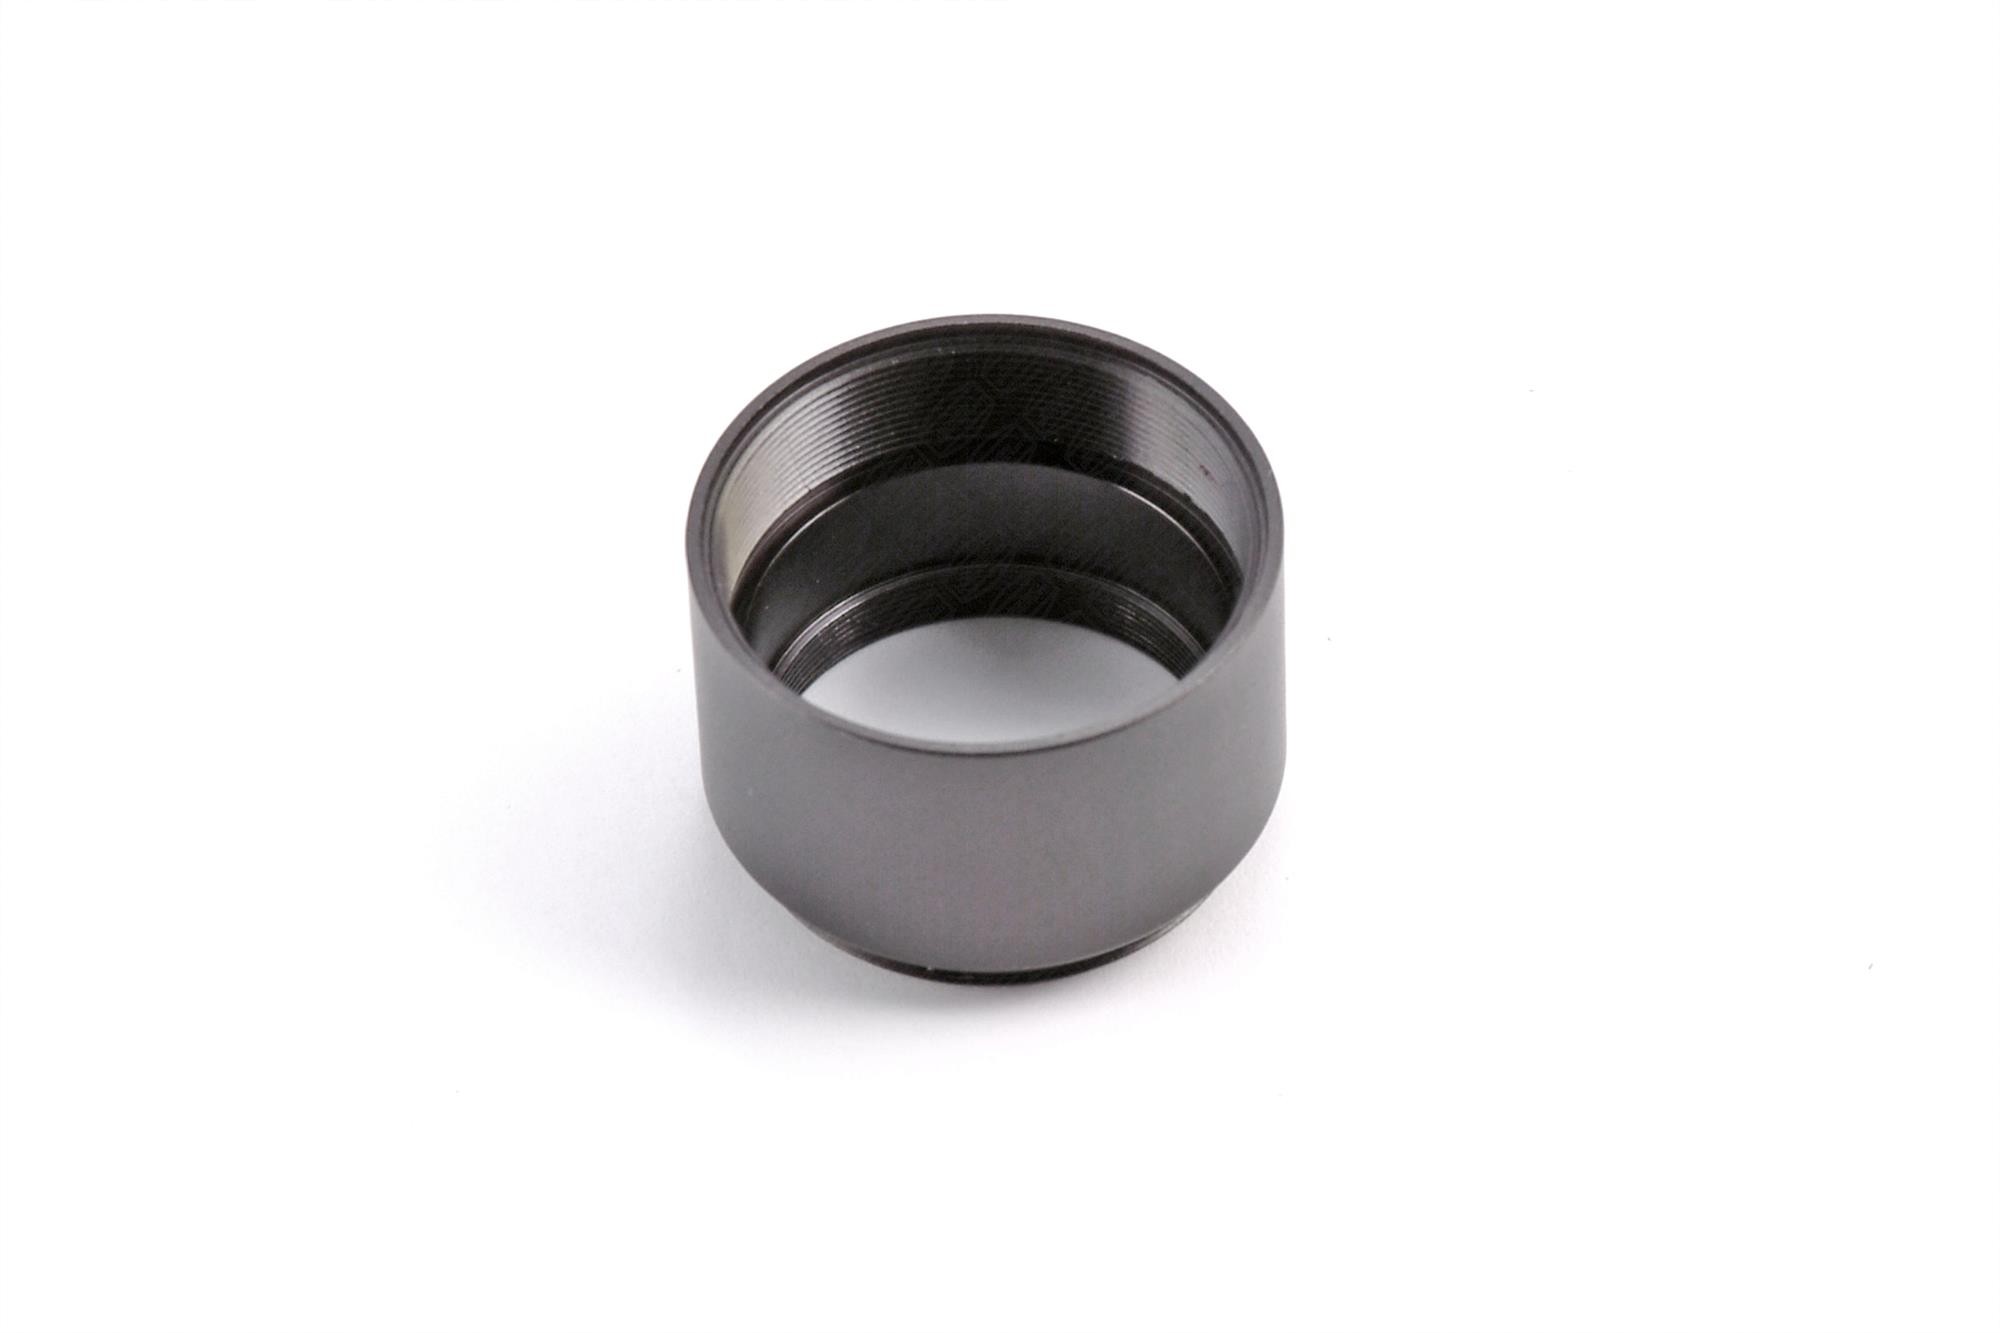 Baader 1¼" - 31.8mm nosepiece extension with 1¼" filter thread on both sides (T-2 part #05)